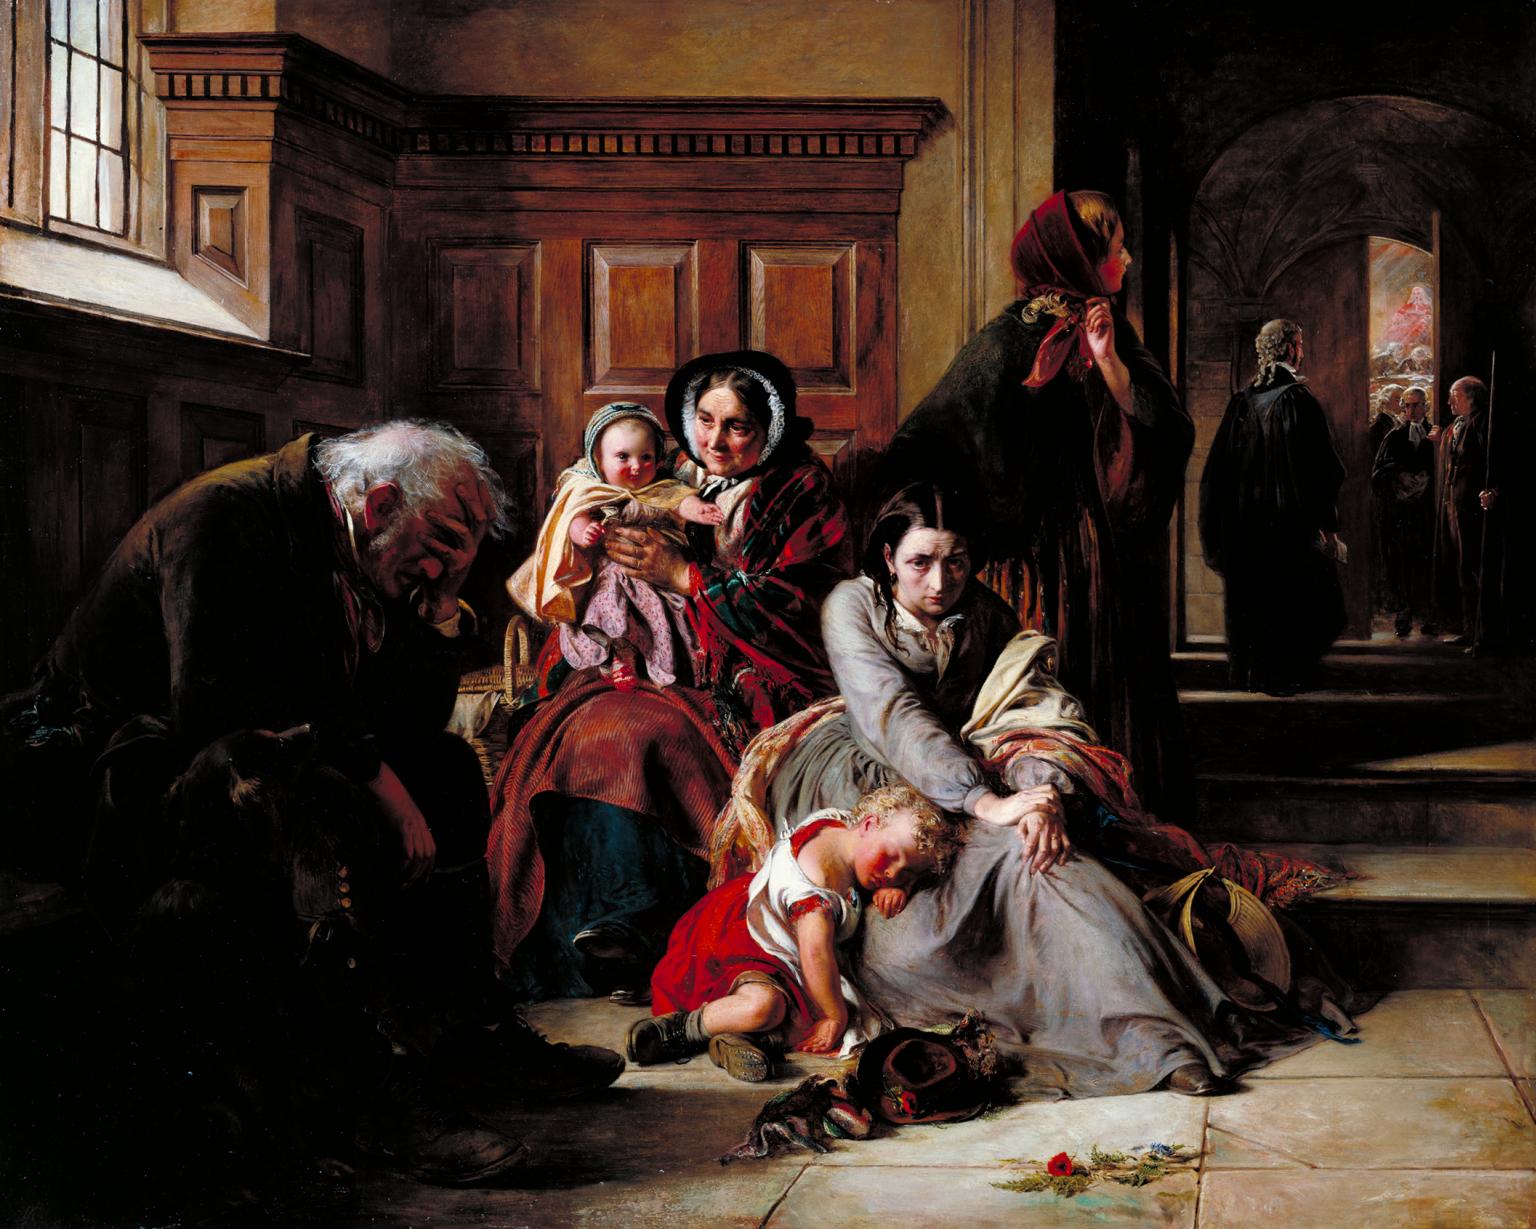 1857 painting by Abraham Solomon, depicting a family in distress, waiting to hear the verdict in a court case.